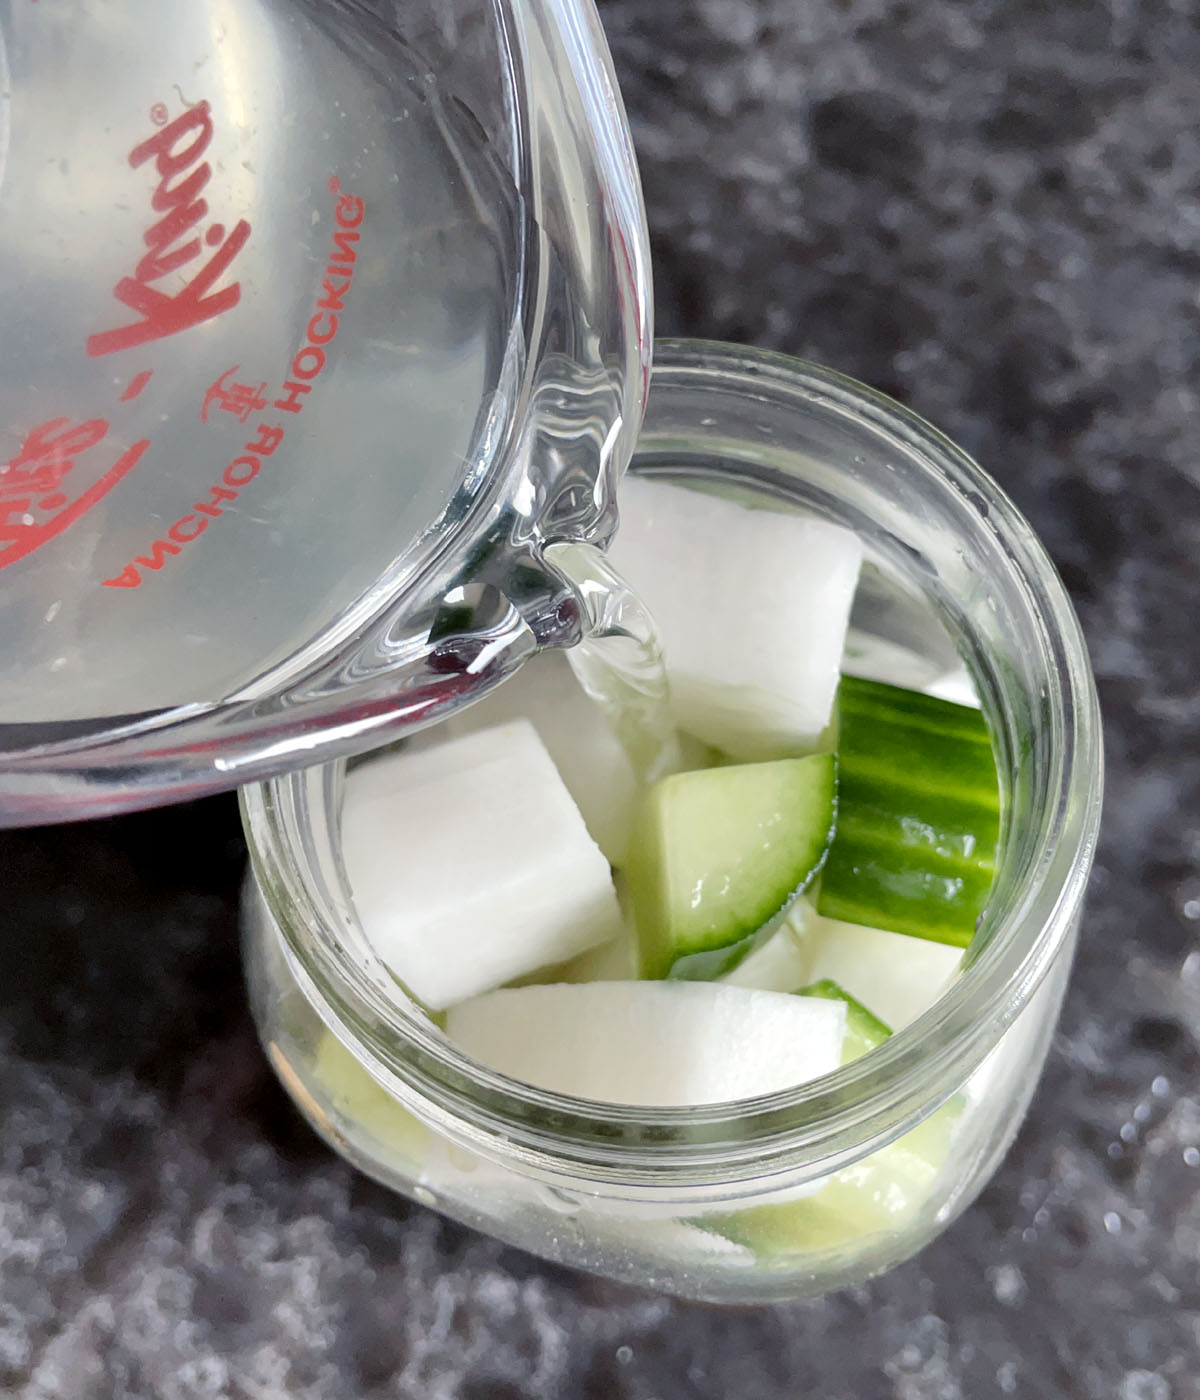 Clear liquid being poured into a jar containing chunks of white daikon radish and green cucumber.